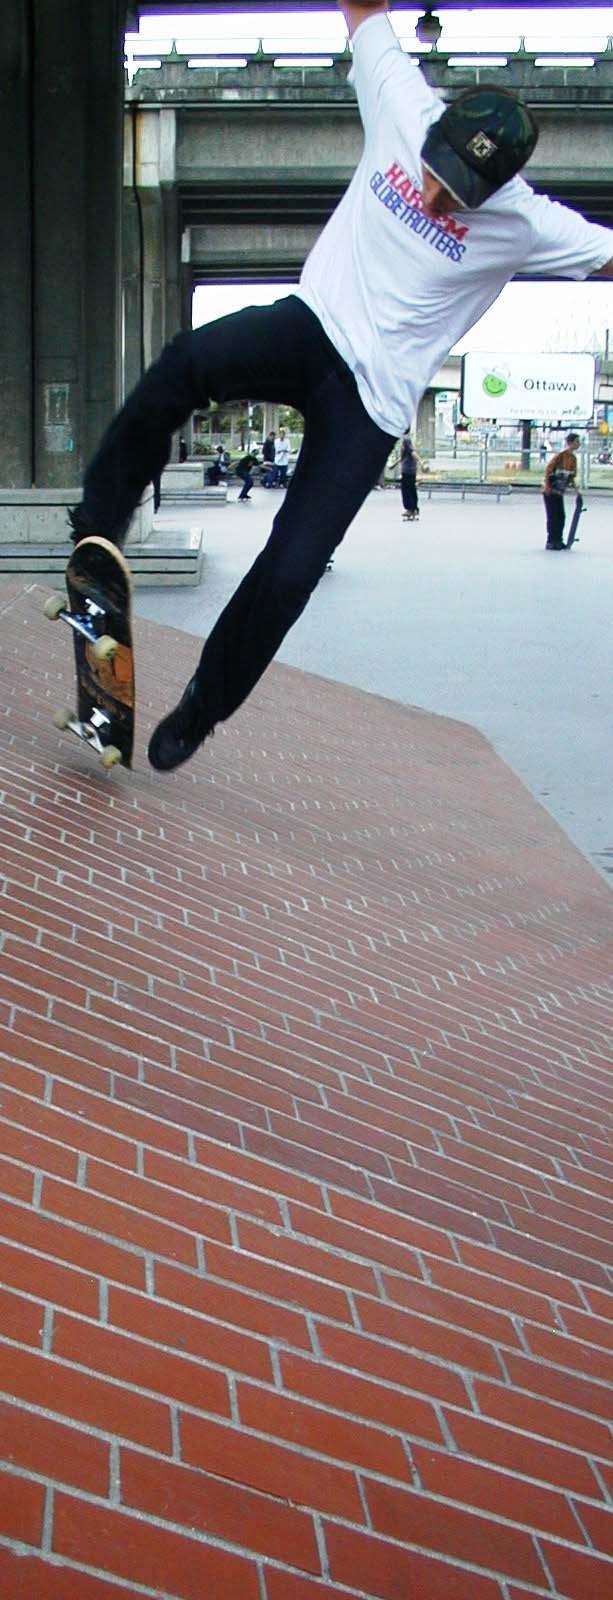 This is not, please, a skateboarding bowl, with all the hard edges (and challenges)